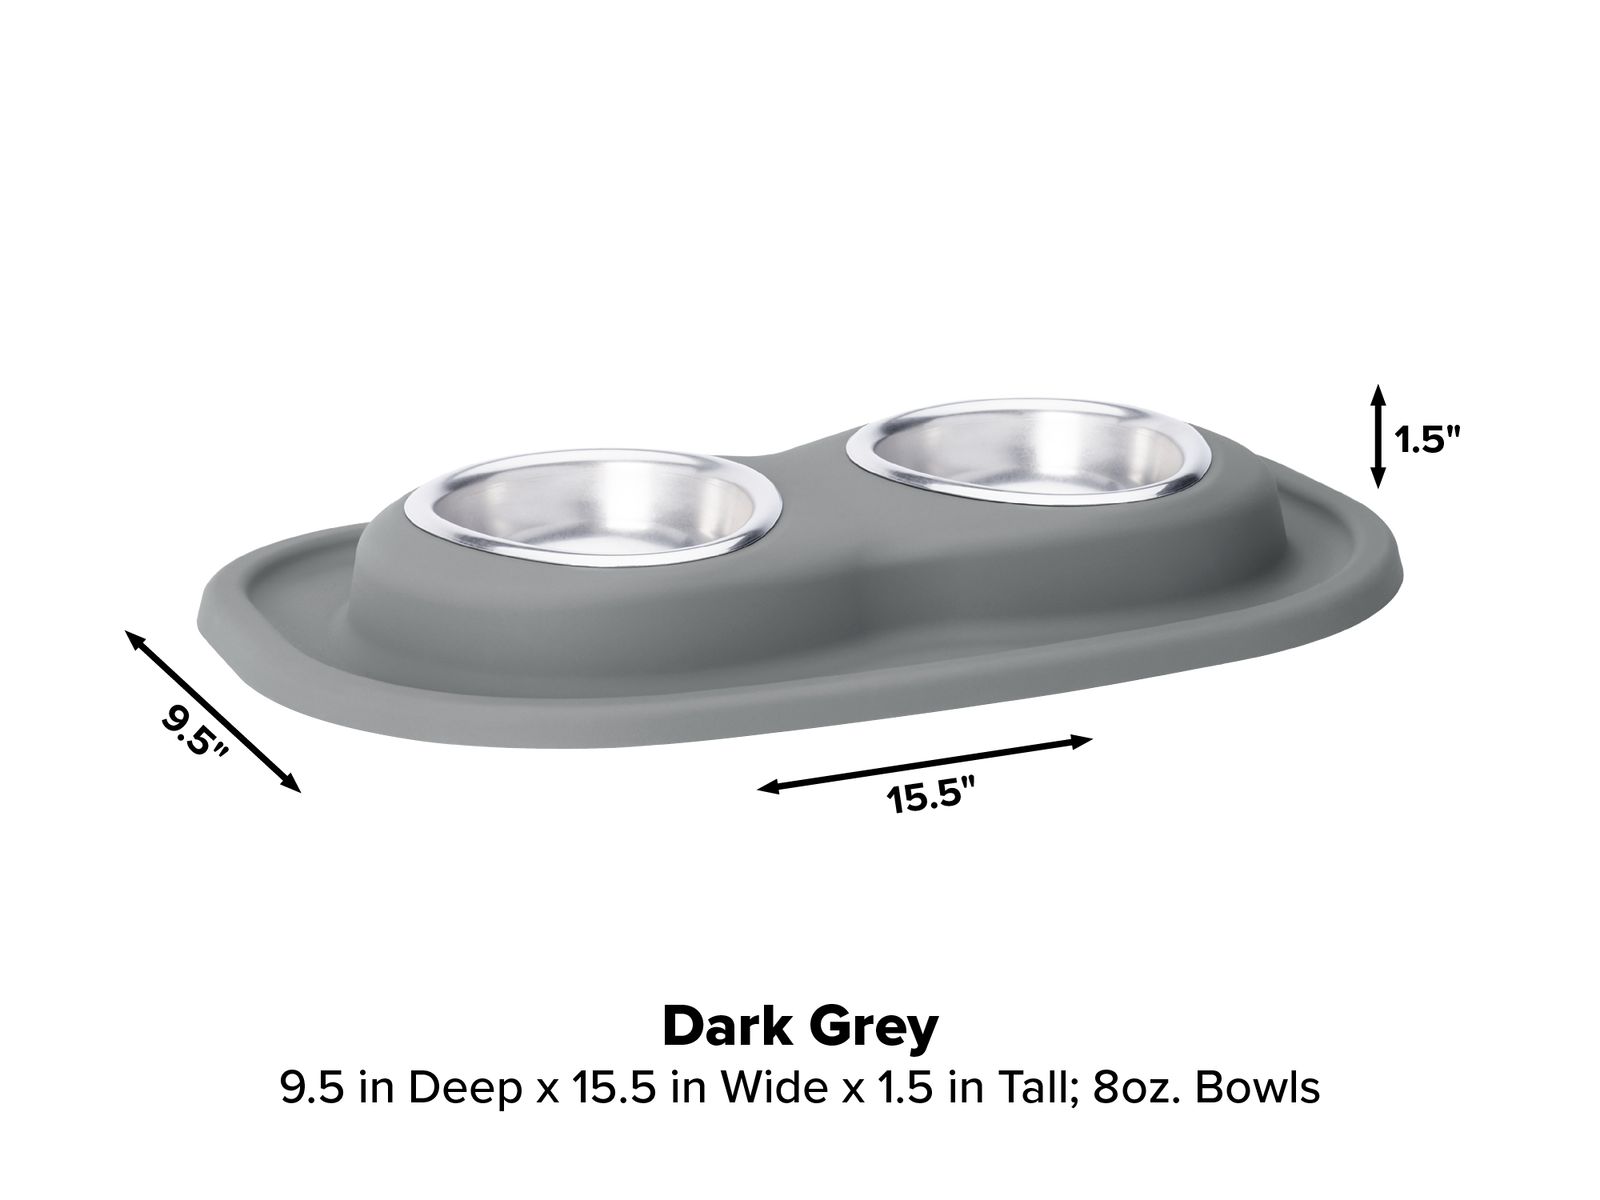 WeatherTech Double High Pet Feeding System - Elevated Dog/Cat Bowls - 3  inch High Dark Grey (DHC0803DGDG)